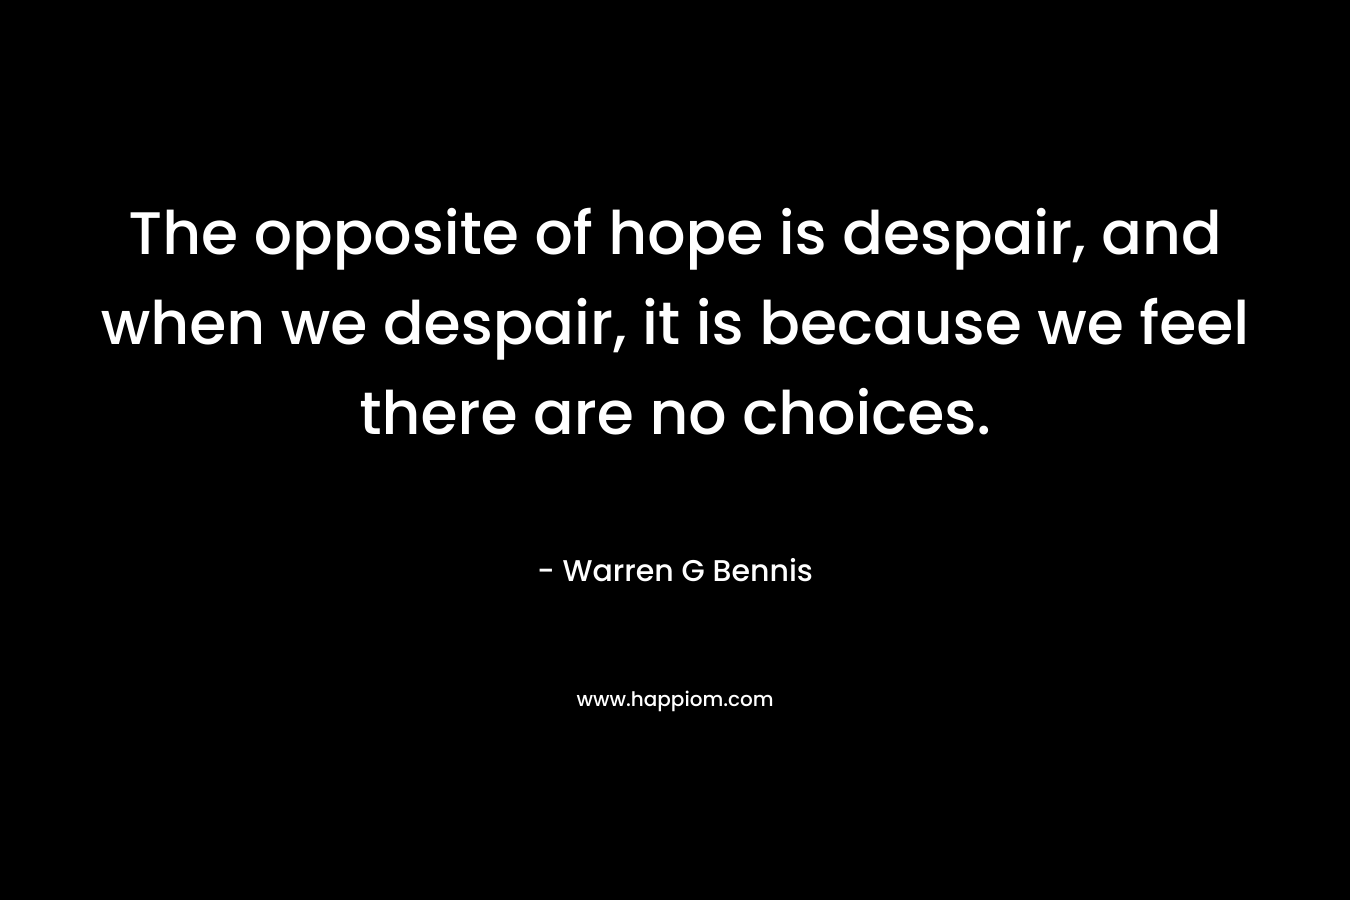 The opposite of hope is despair, and when we despair, it is because we feel there are no choices. – Warren G Bennis